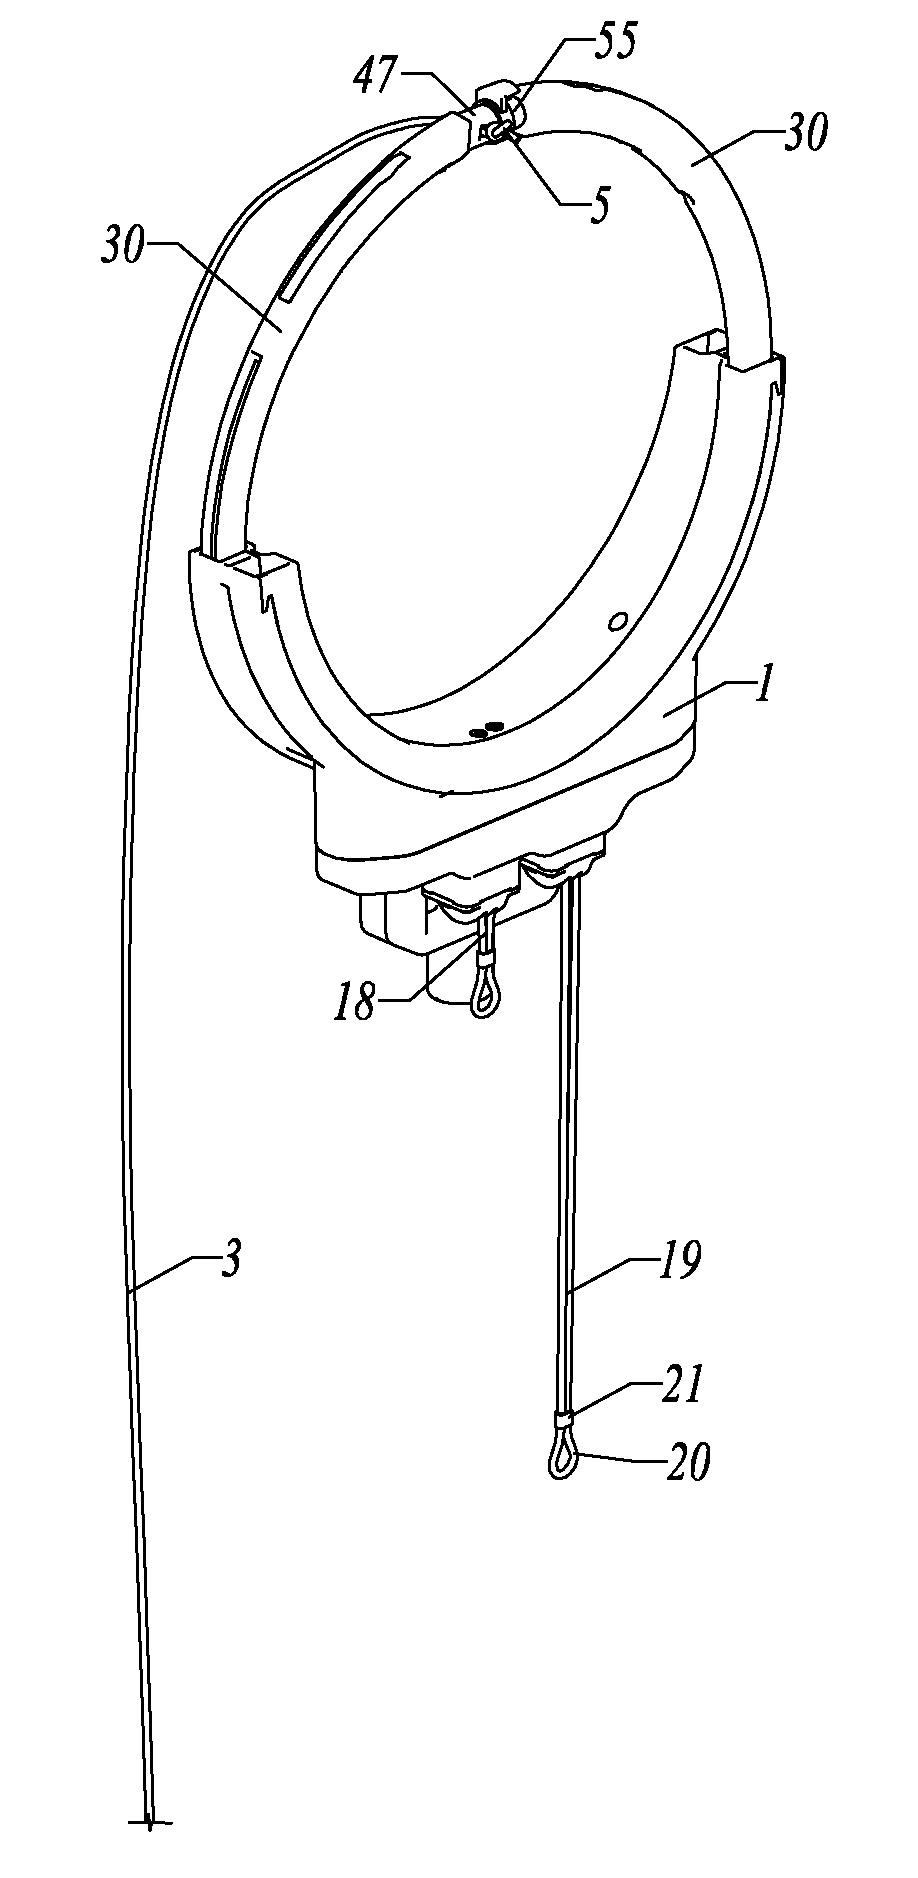 Remotely-operated rope-threading tool